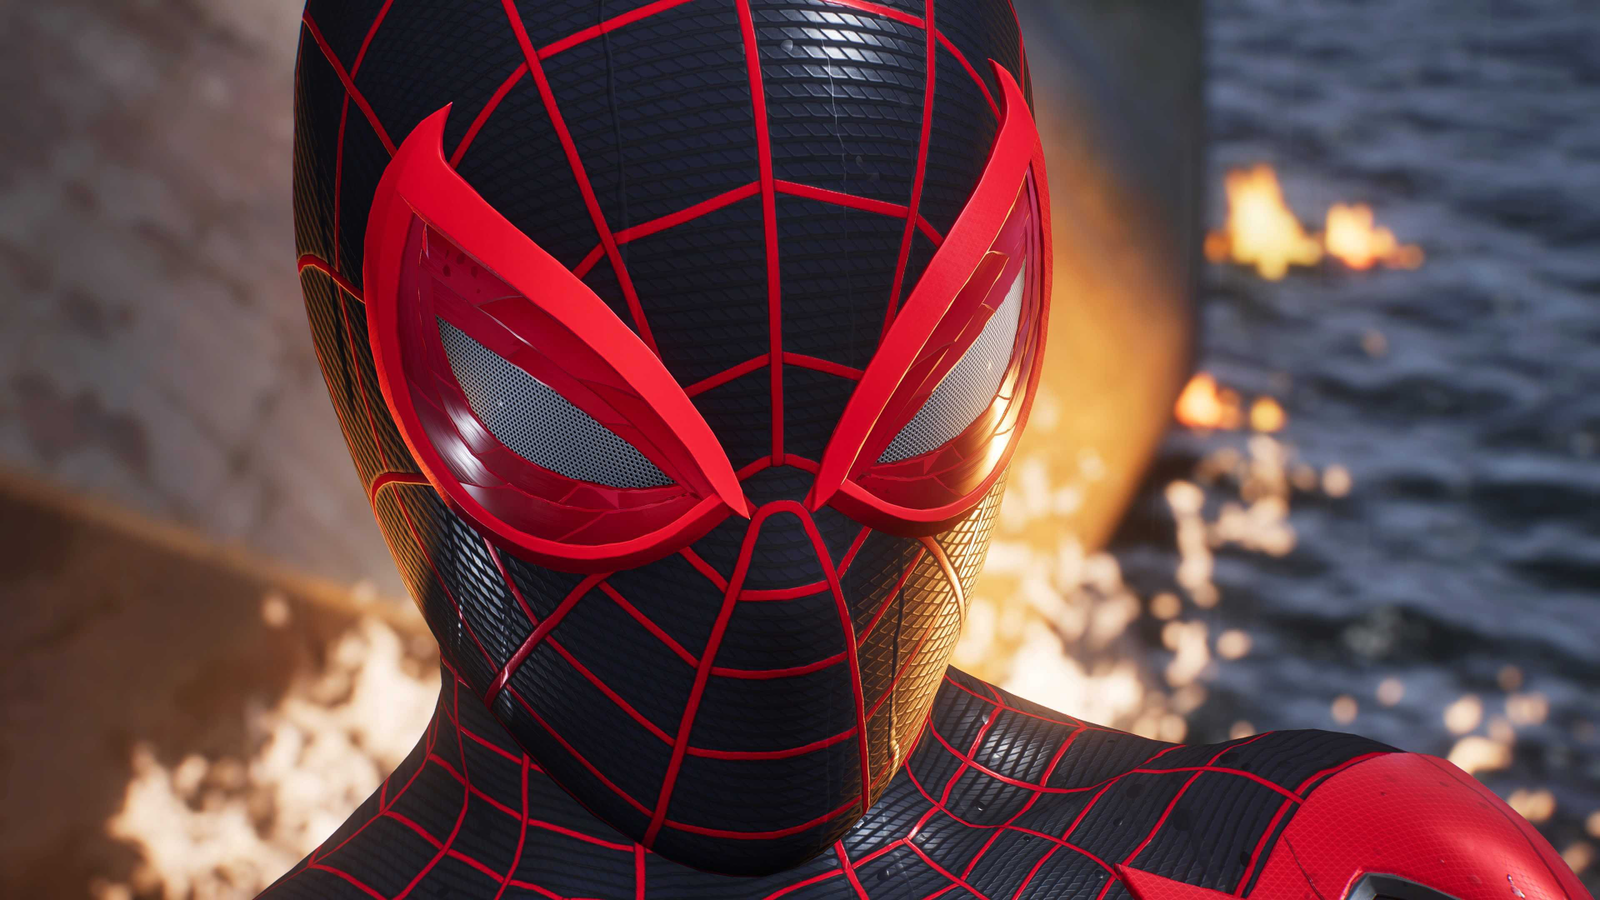 Marvel's Spider-Man 2 Ending Explained: Will There Be Another Game?